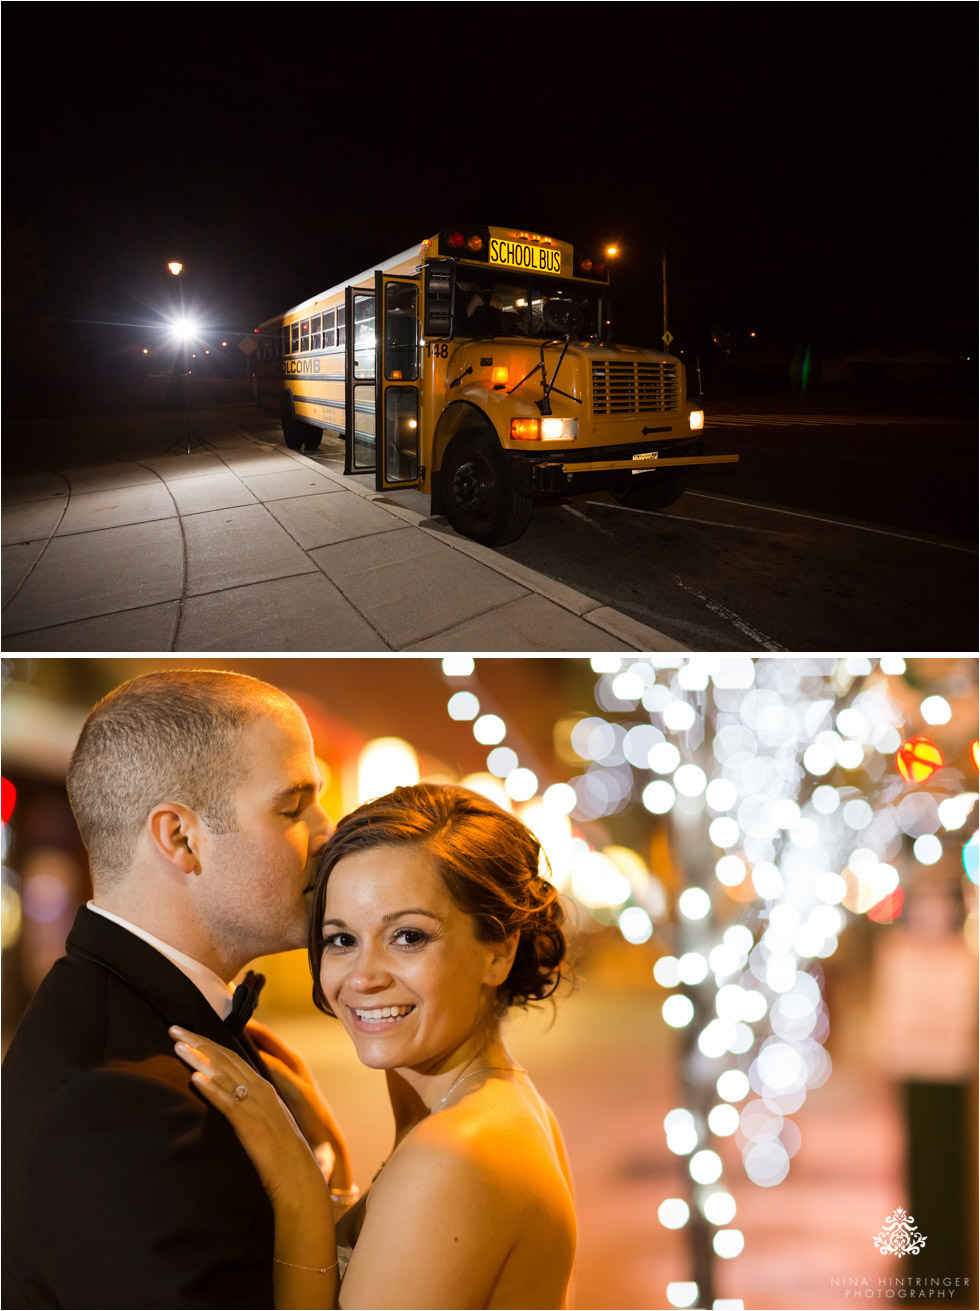 Night shots at Please Touch Museum and near City Hall in Philadelphia, Pennsylvania - Blog of Nina Hintringer Photography - Wedding Photography, Wedding Reportage and Destination Weddings